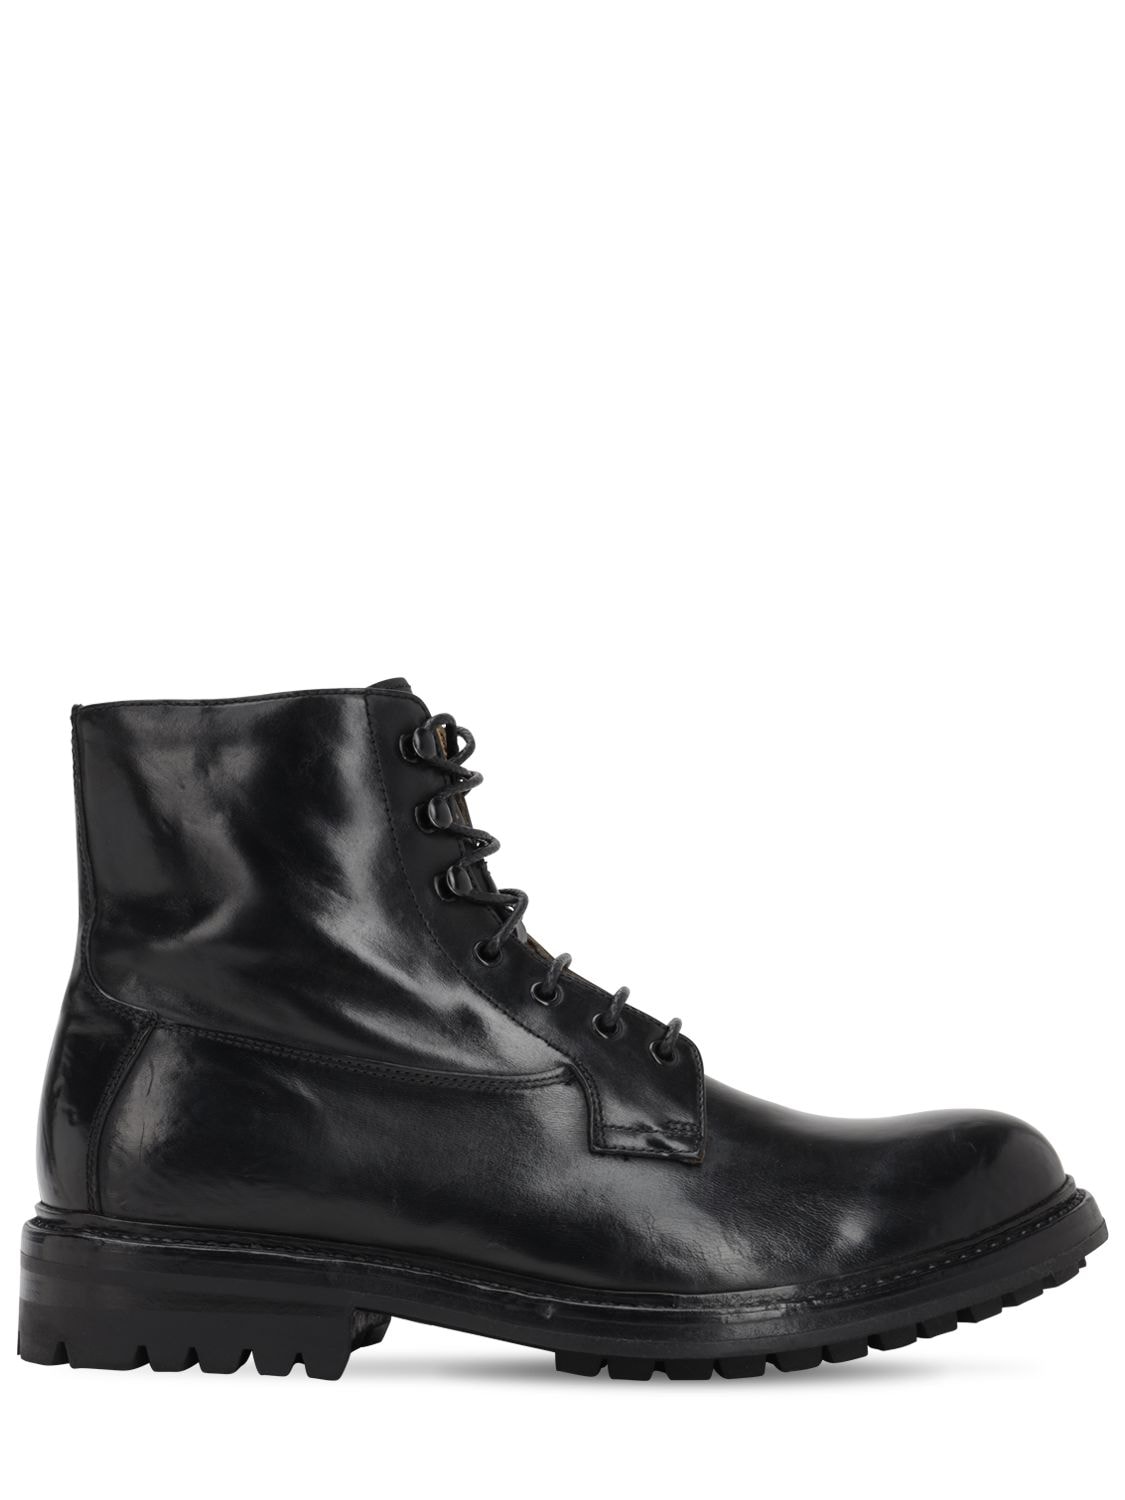 OFFICINE CREATIVE EXETER LEATHER LACE-UP BOOTS,70ID0A004-MDA00